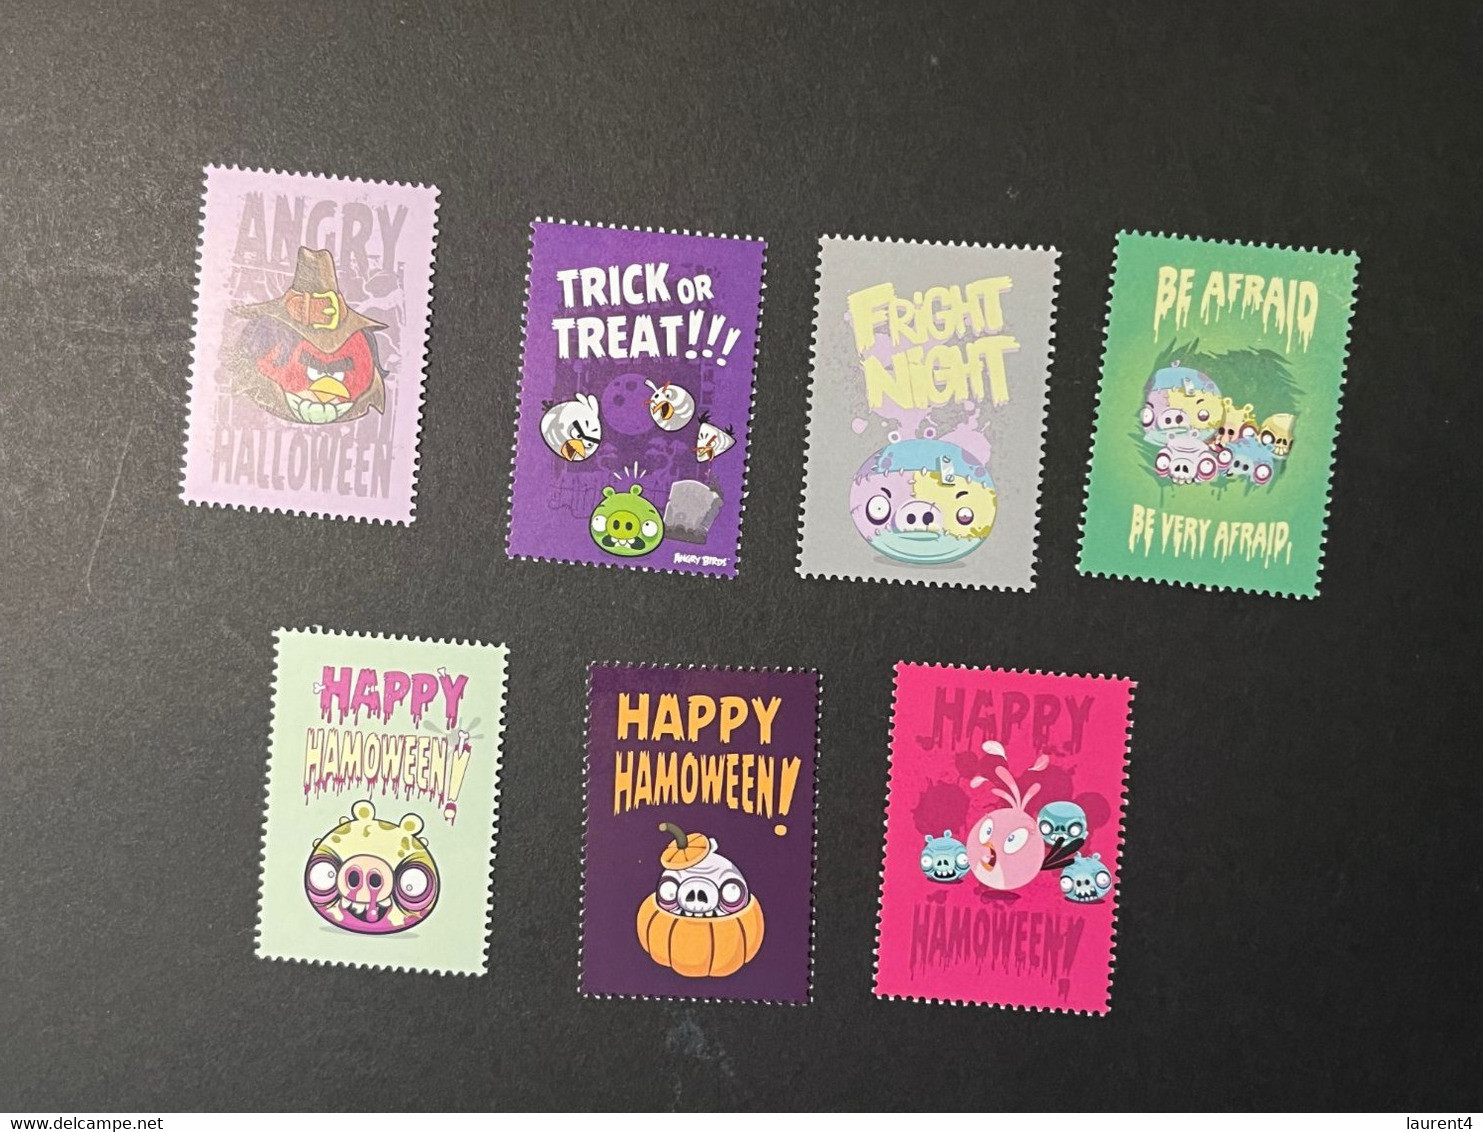 (STAMPS 7-1-2023) Australia - Halloween - ANGRY BIRDS Cinderella (TAG) 7 (mint) As Seen On Scan - Cinderellas